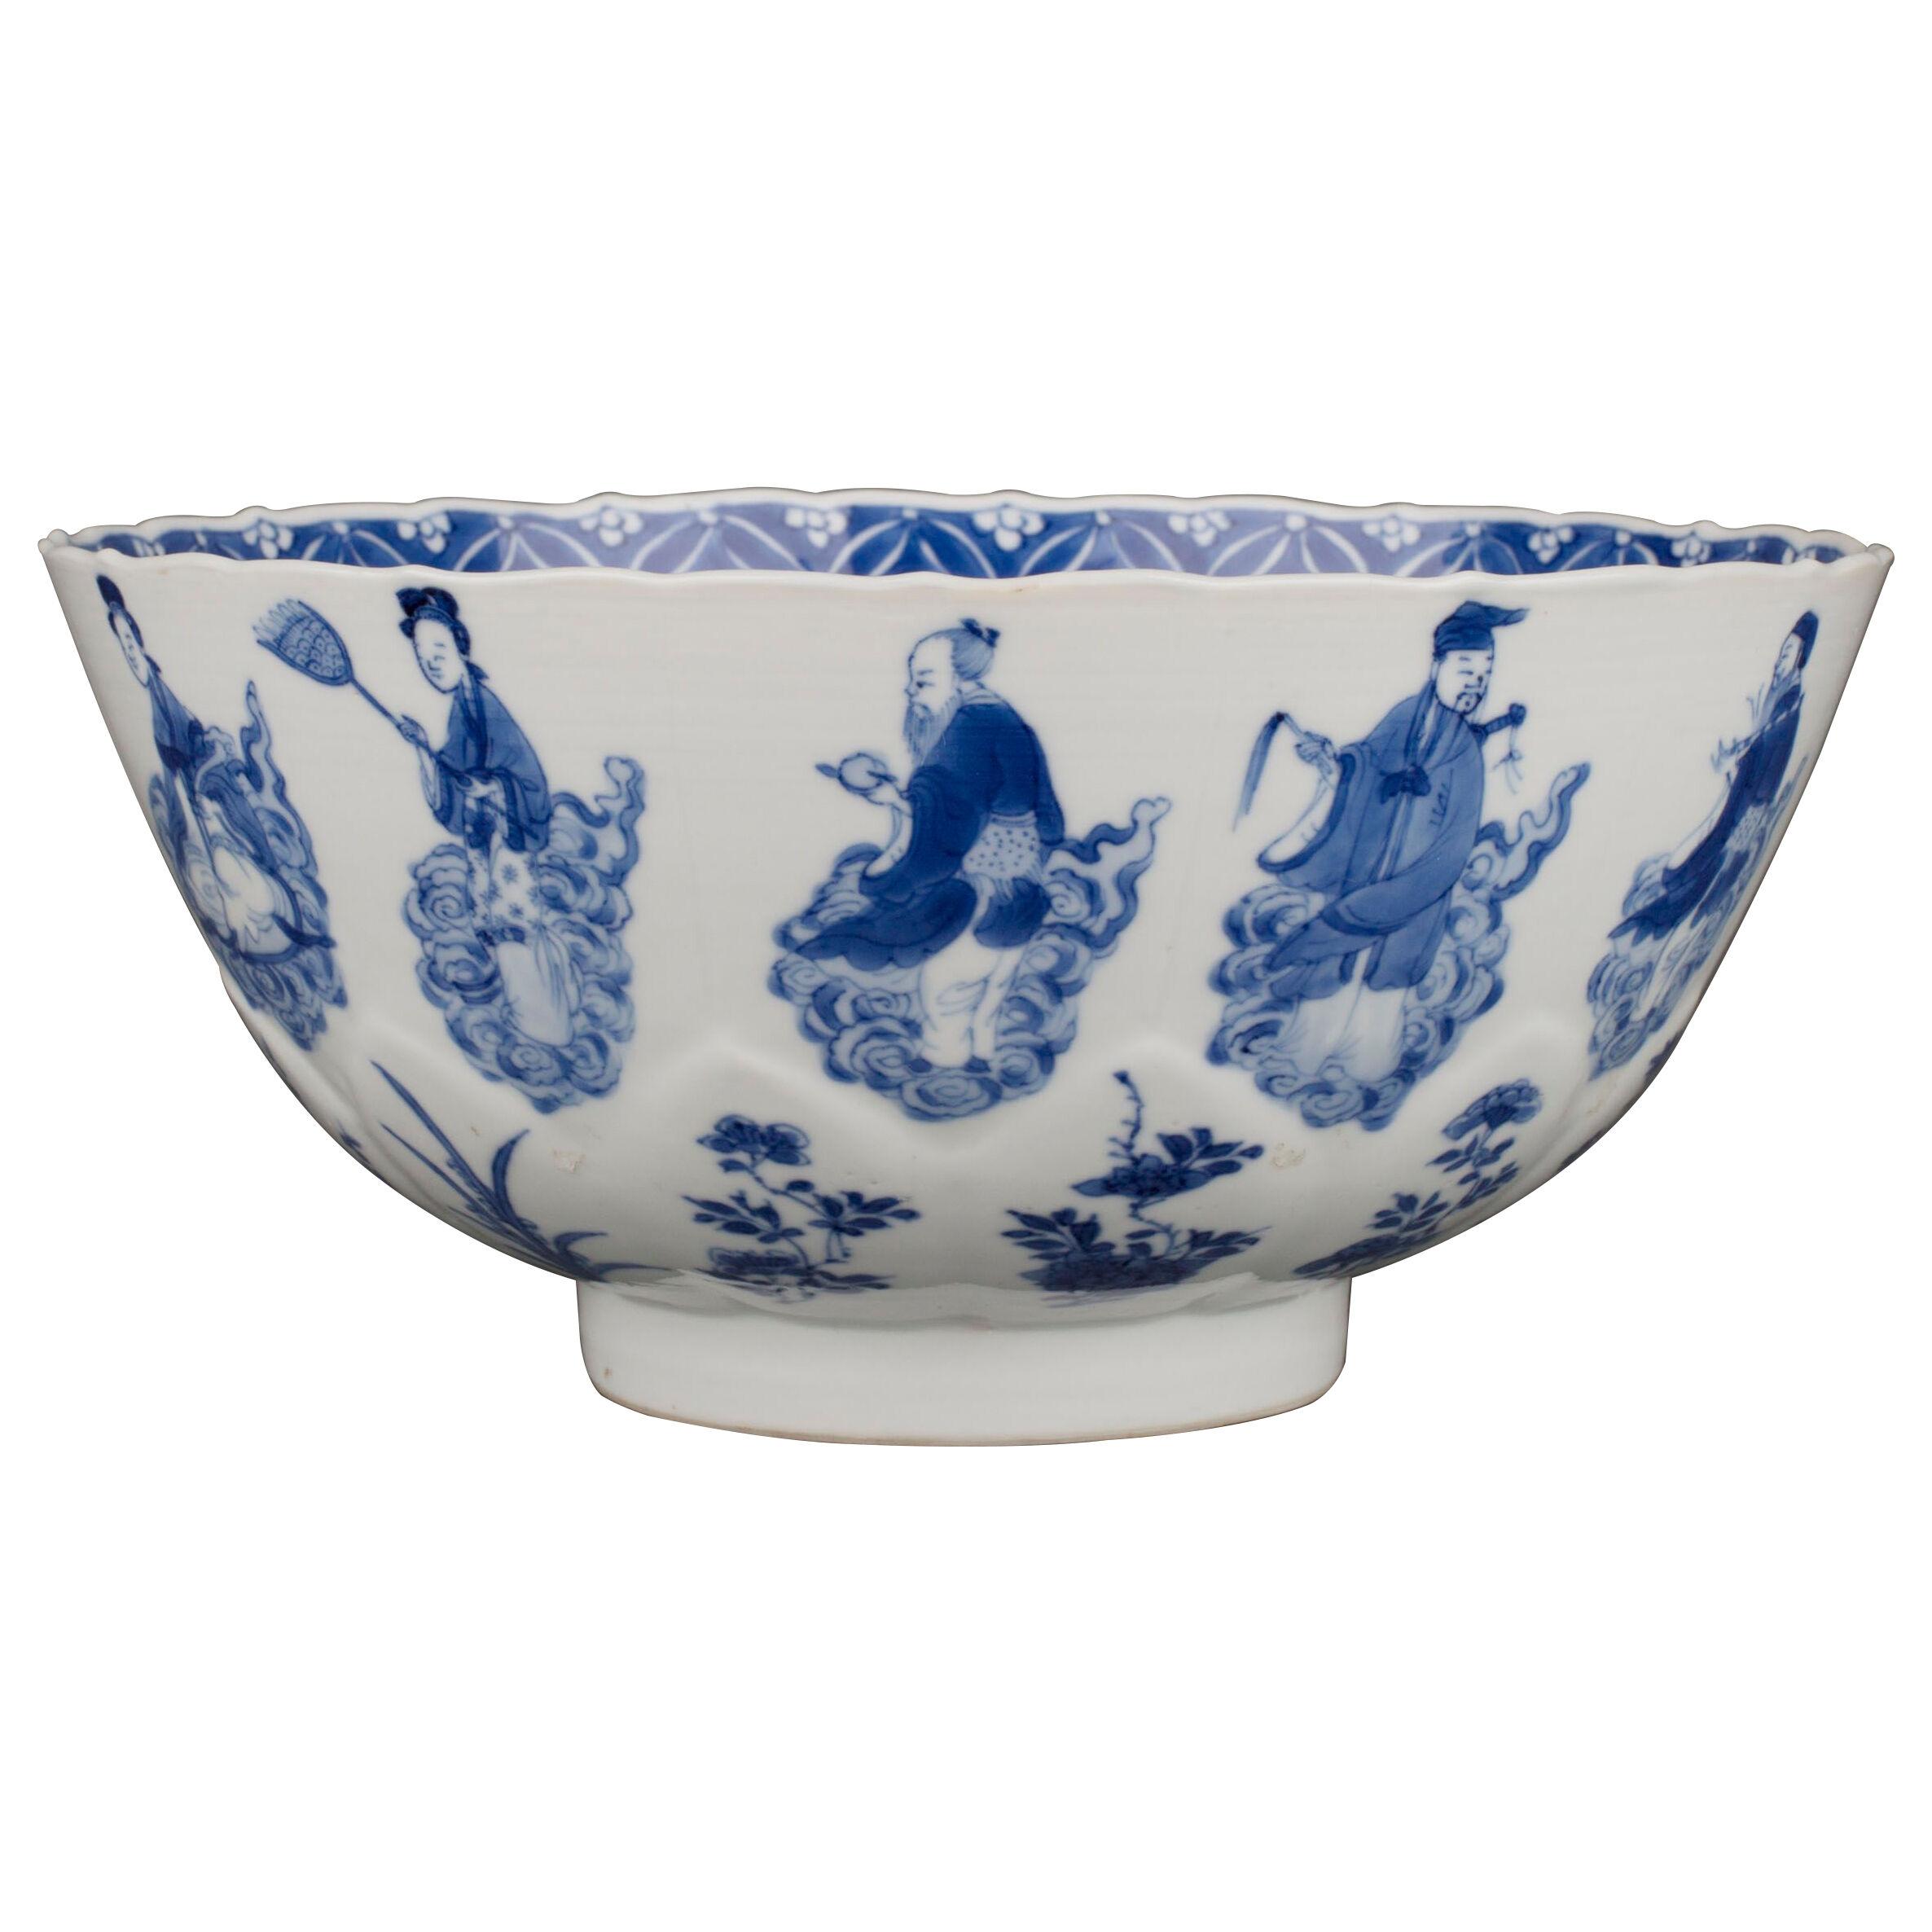 A Chinese porcelain blue and white bowl with lobed rim